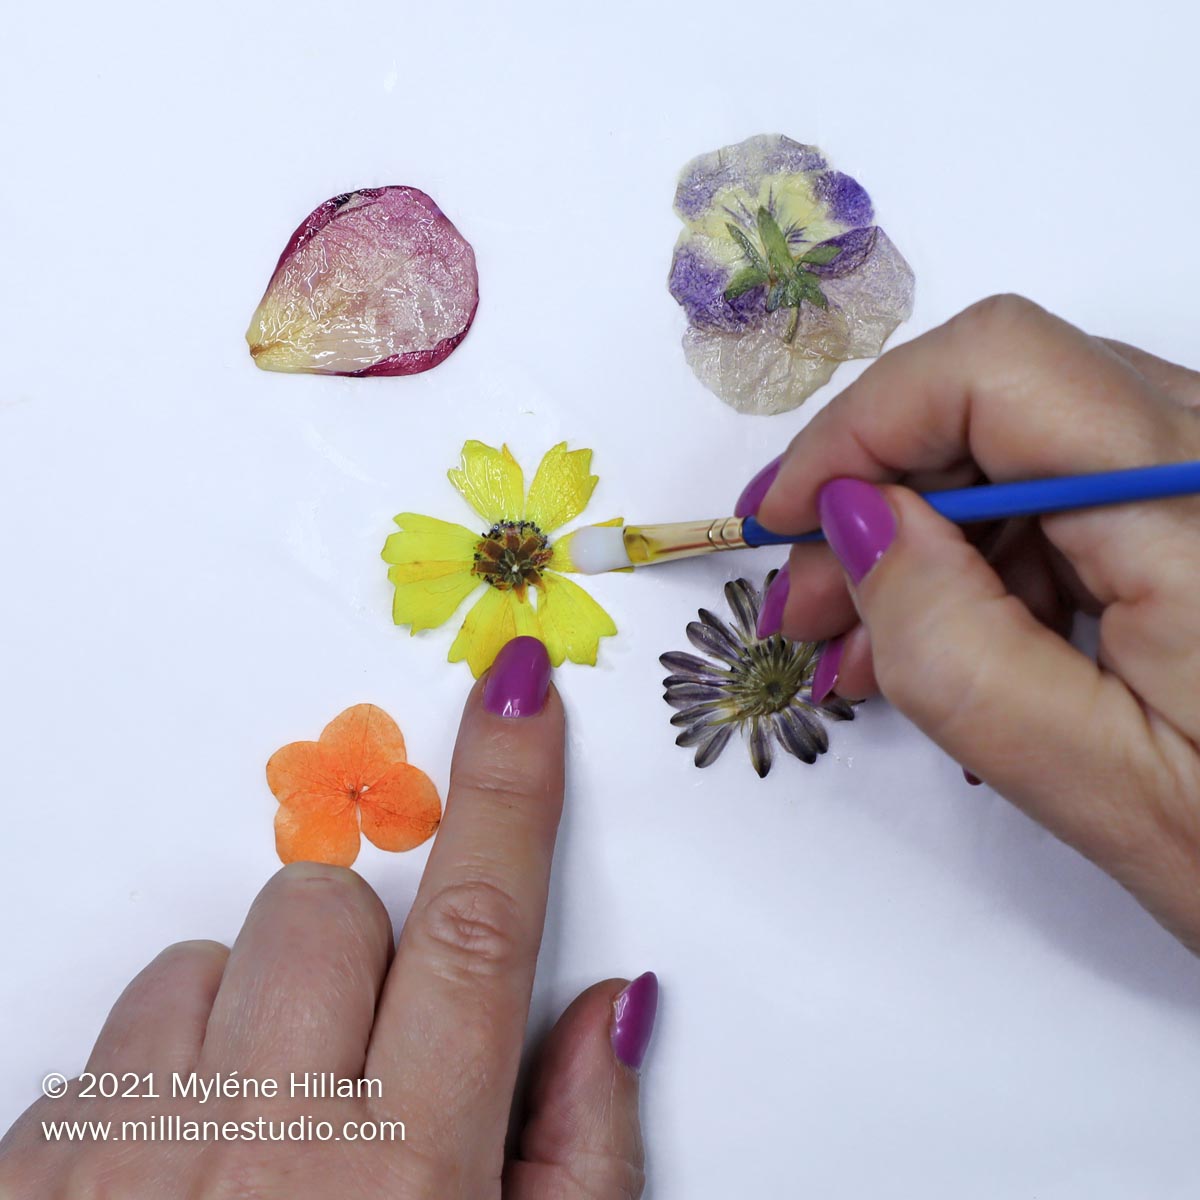 DRIED FLOWERS Embed in Resin